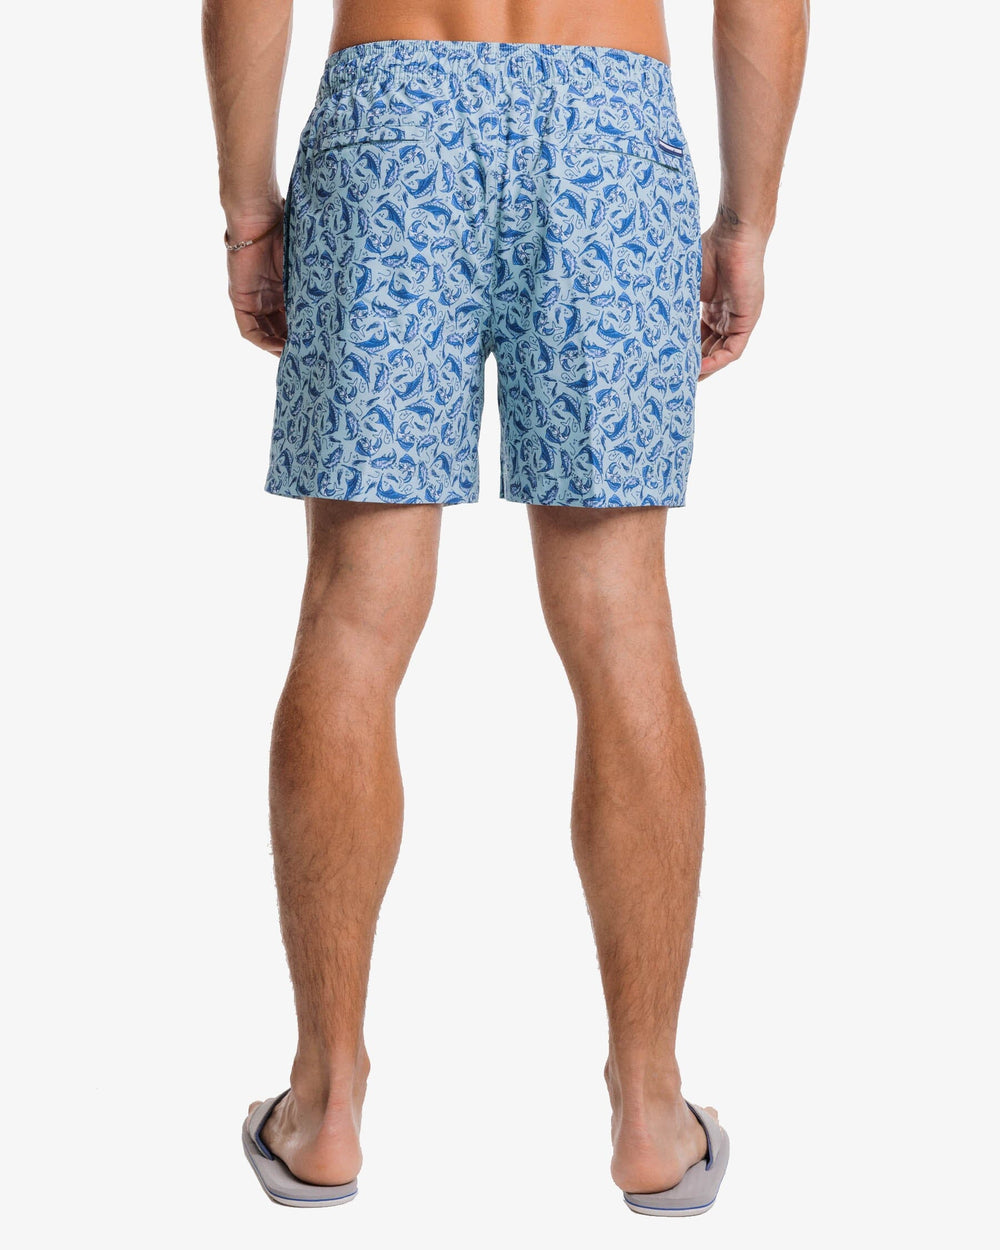 The back view of the Southern Tide Catch You Later Swim Trunk by Southern Tide - Turquoise Sea